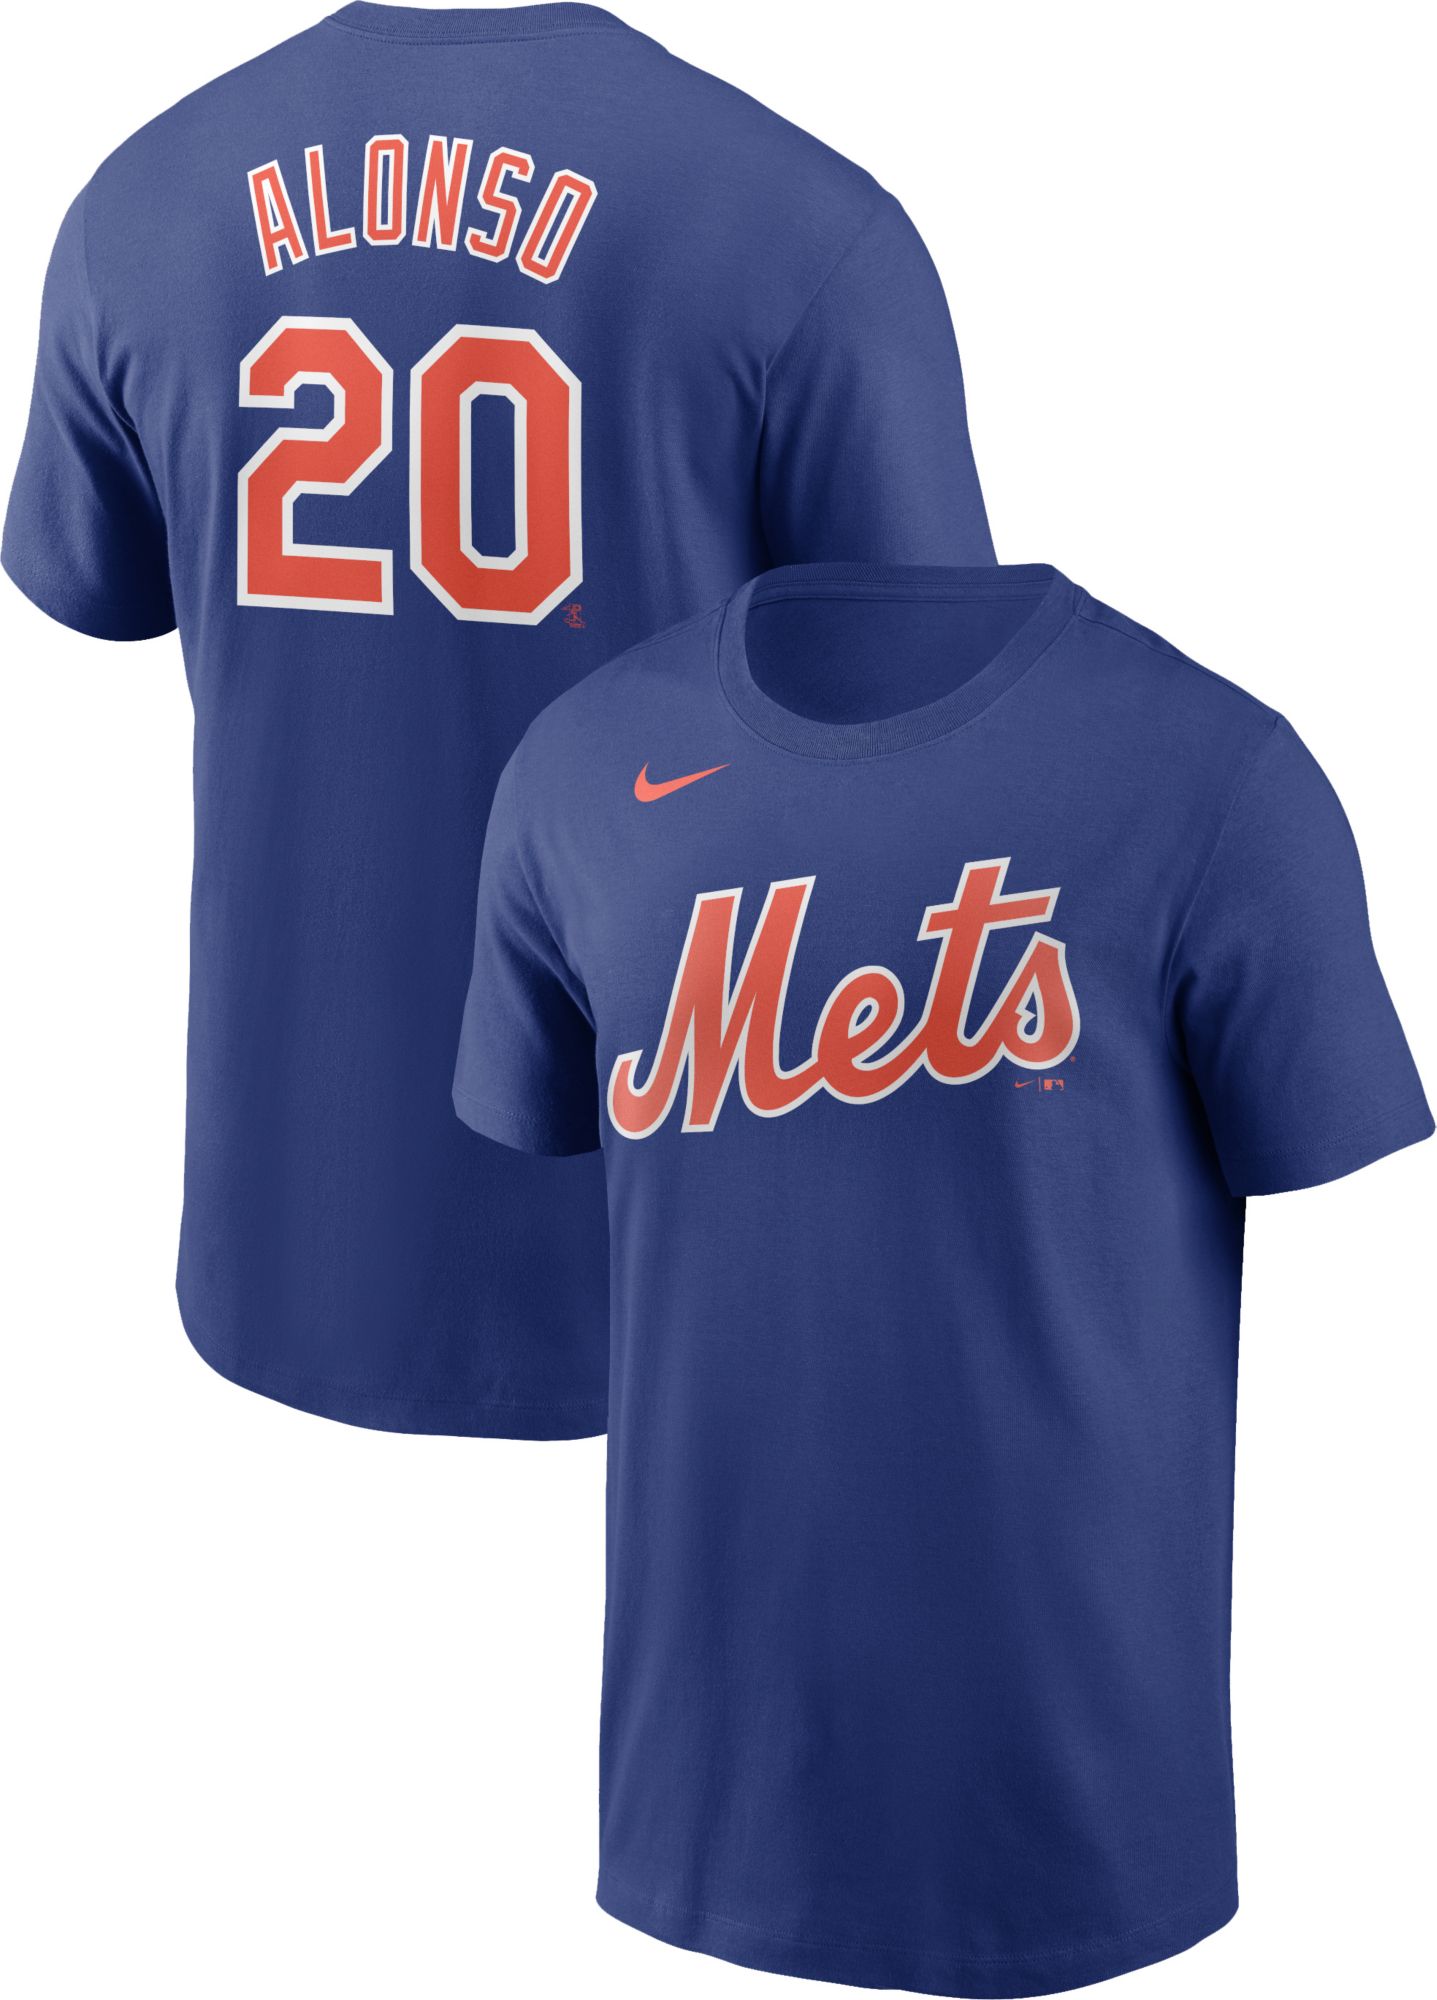 sports authority mets shirts